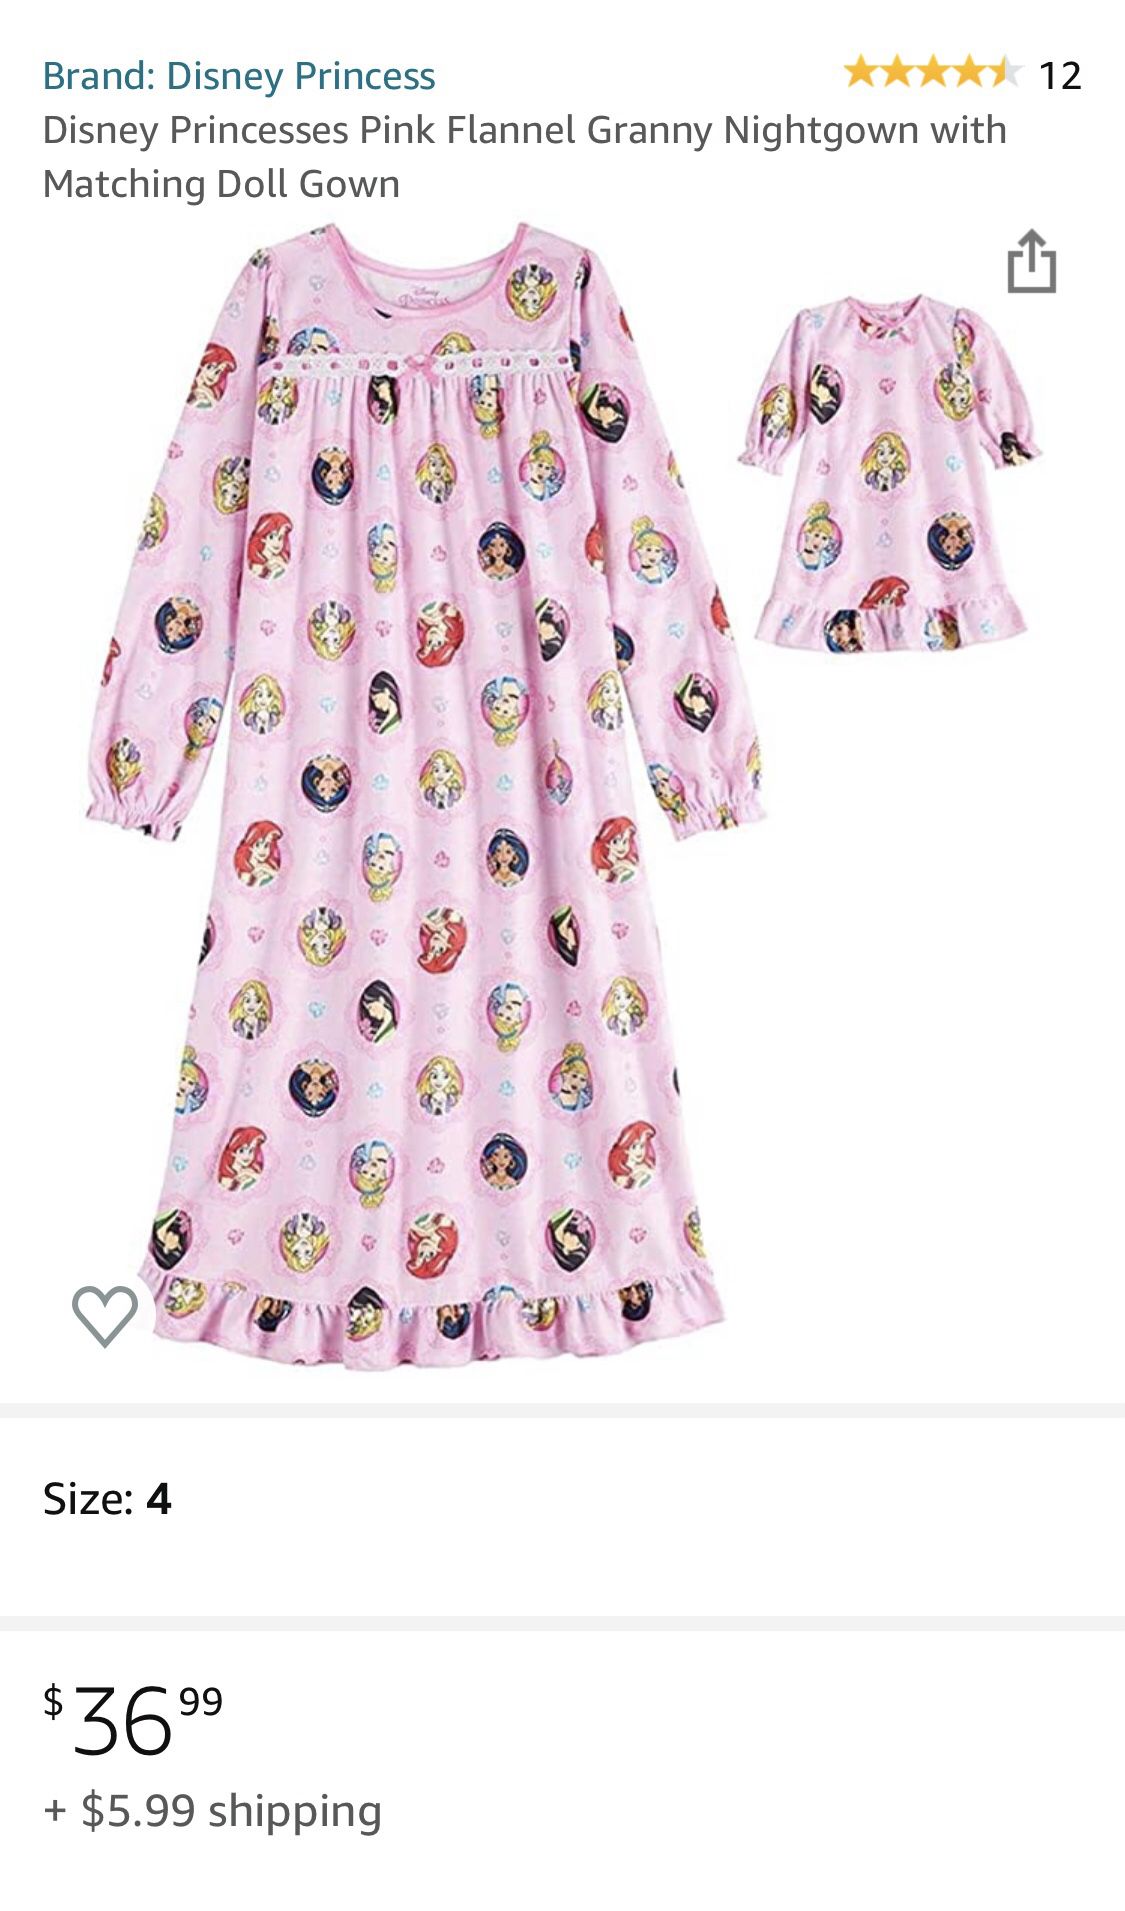 Disney Princess Nightgown With Matching Doll Gown